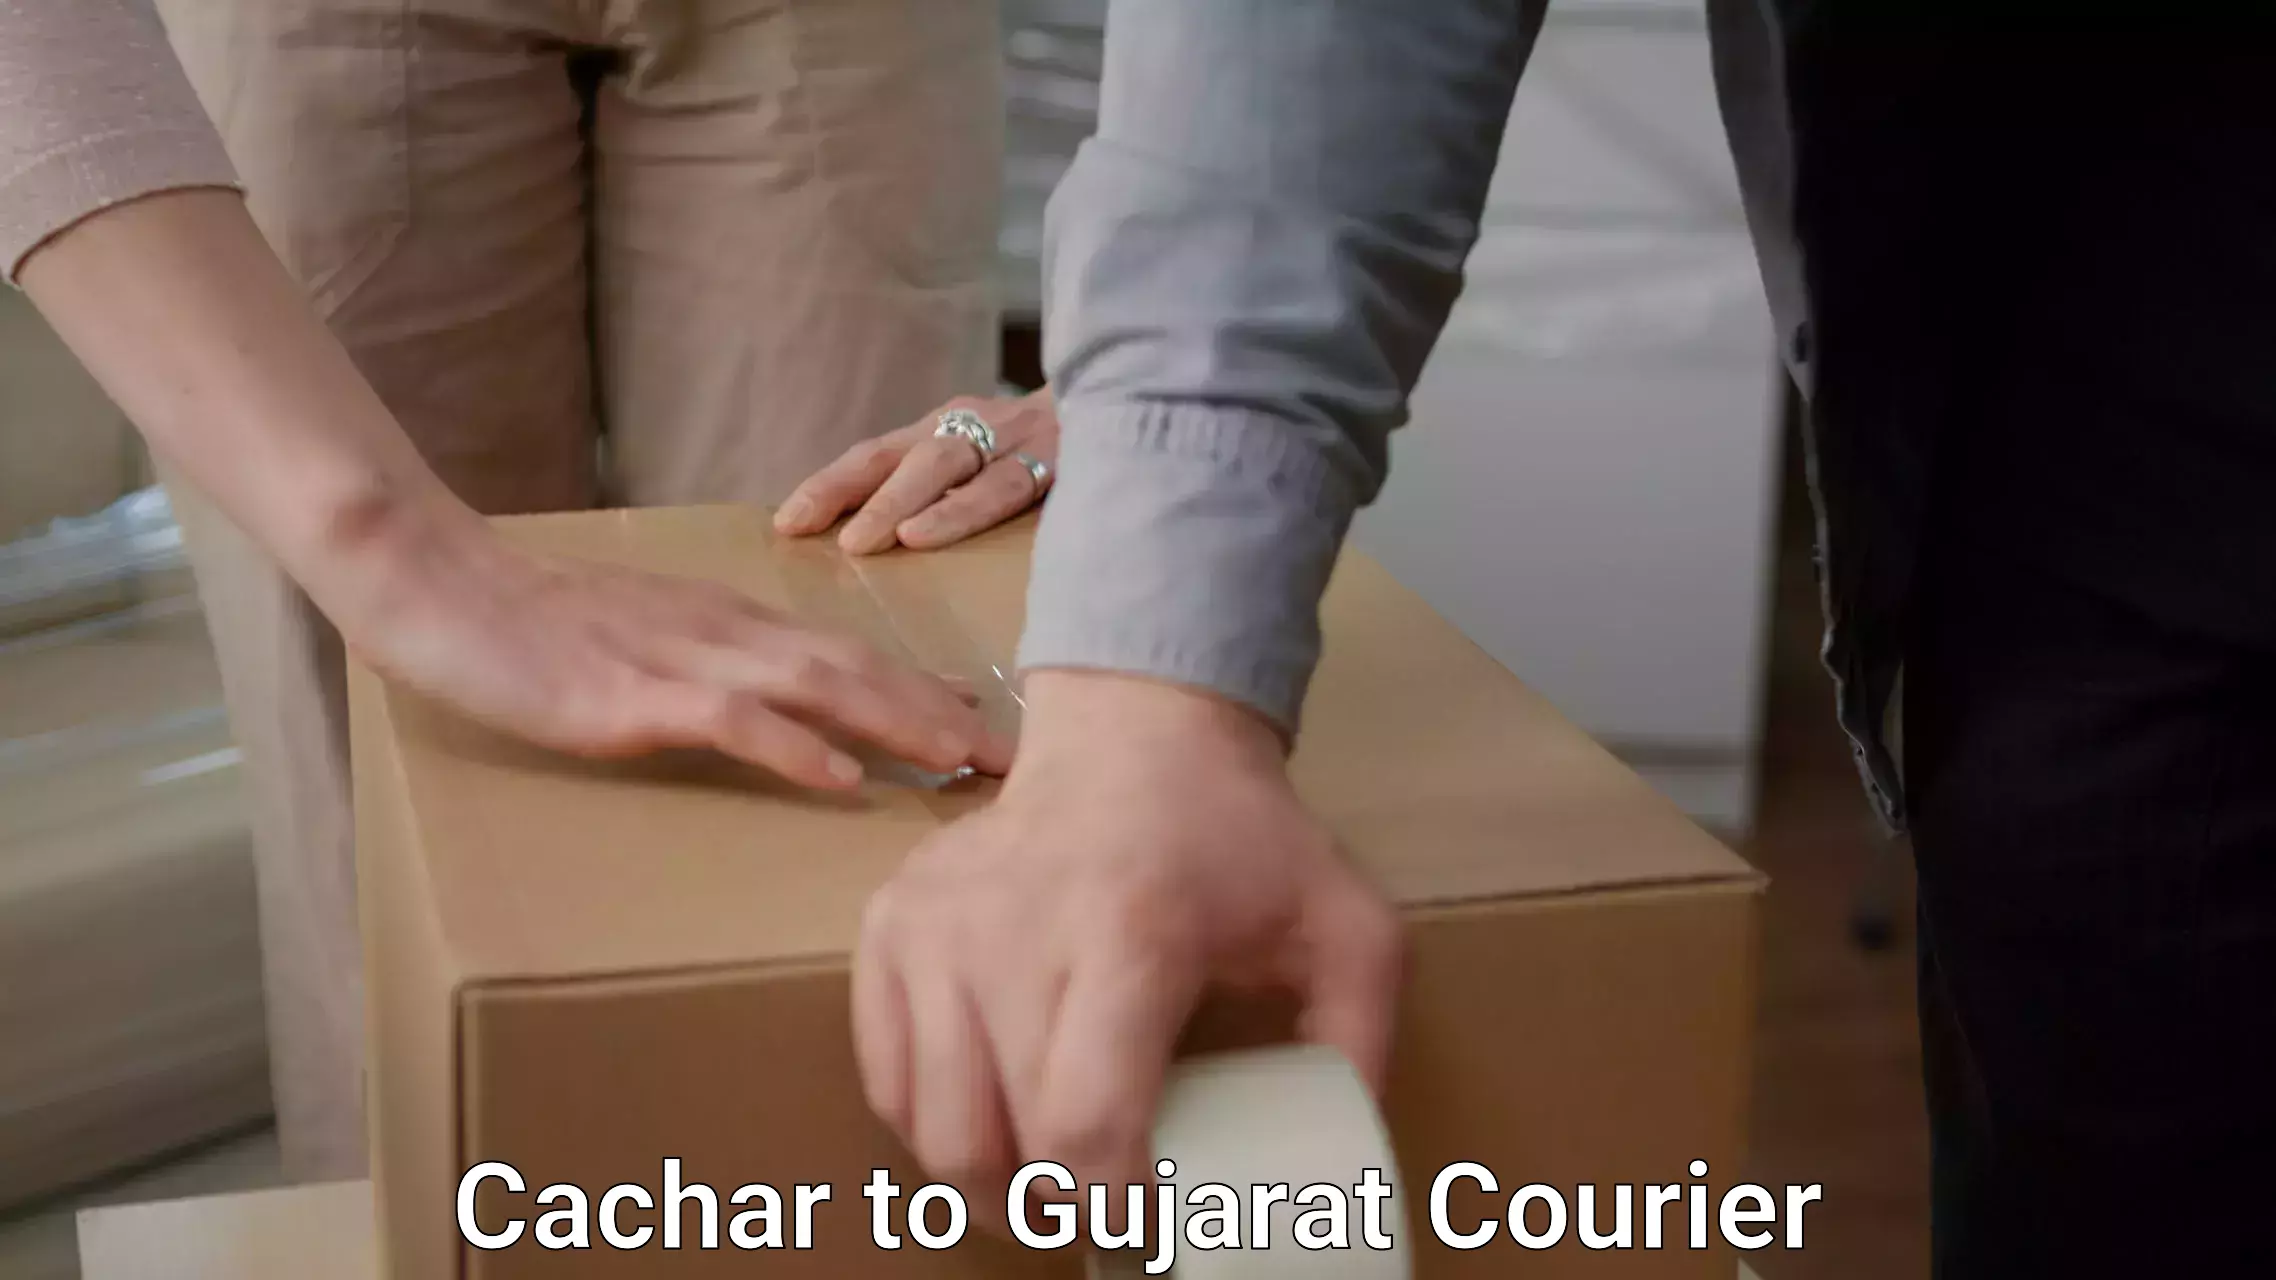 Specialized moving company Cachar to Morbi